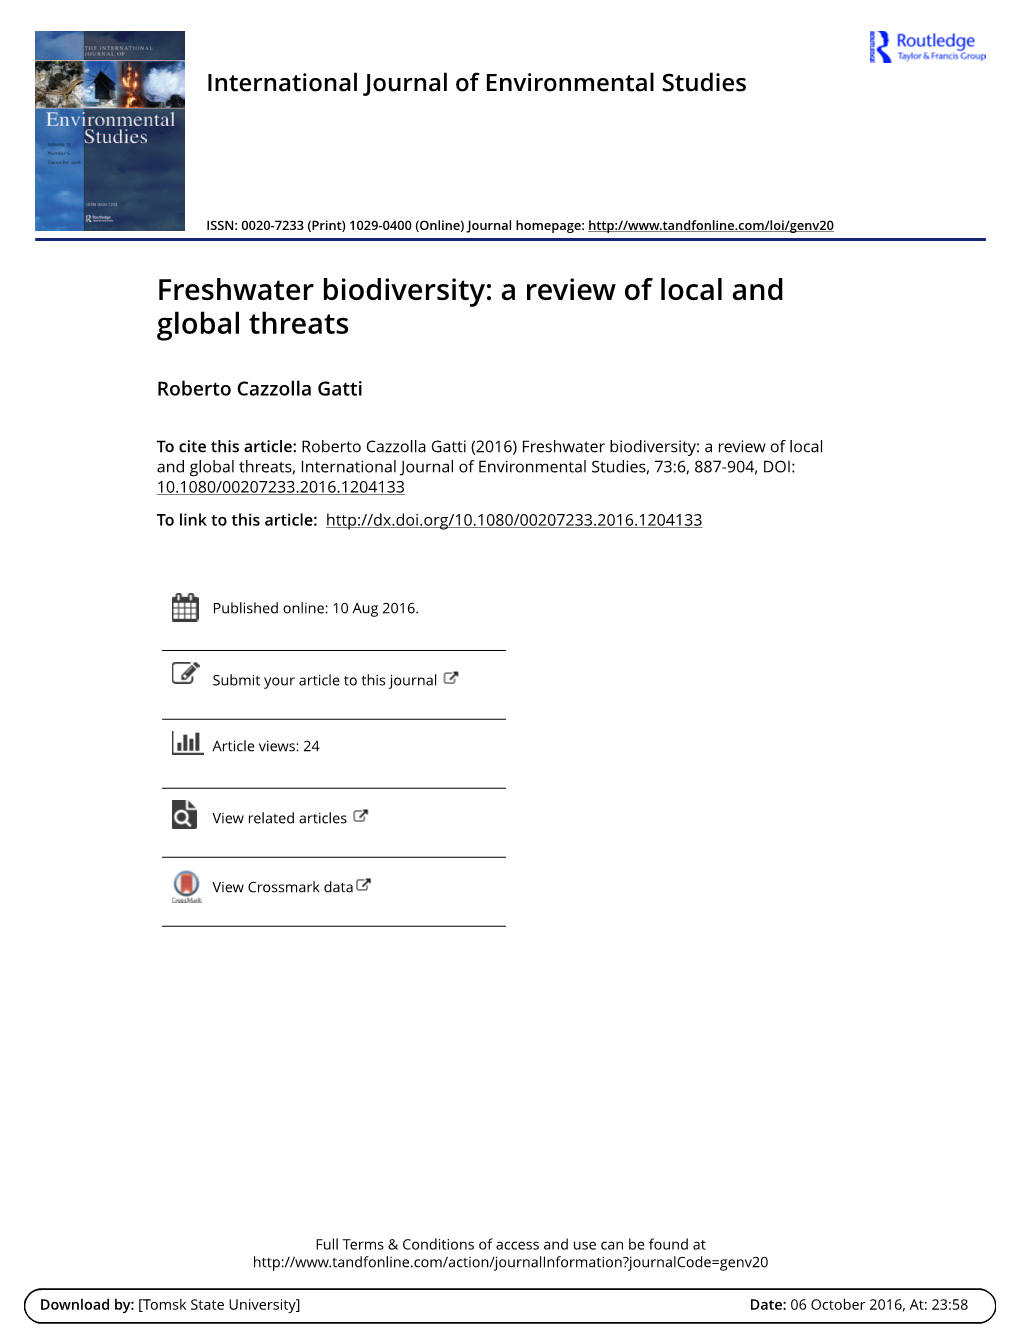 Freshwater Biodiversity: a Review of Local and Global Threats